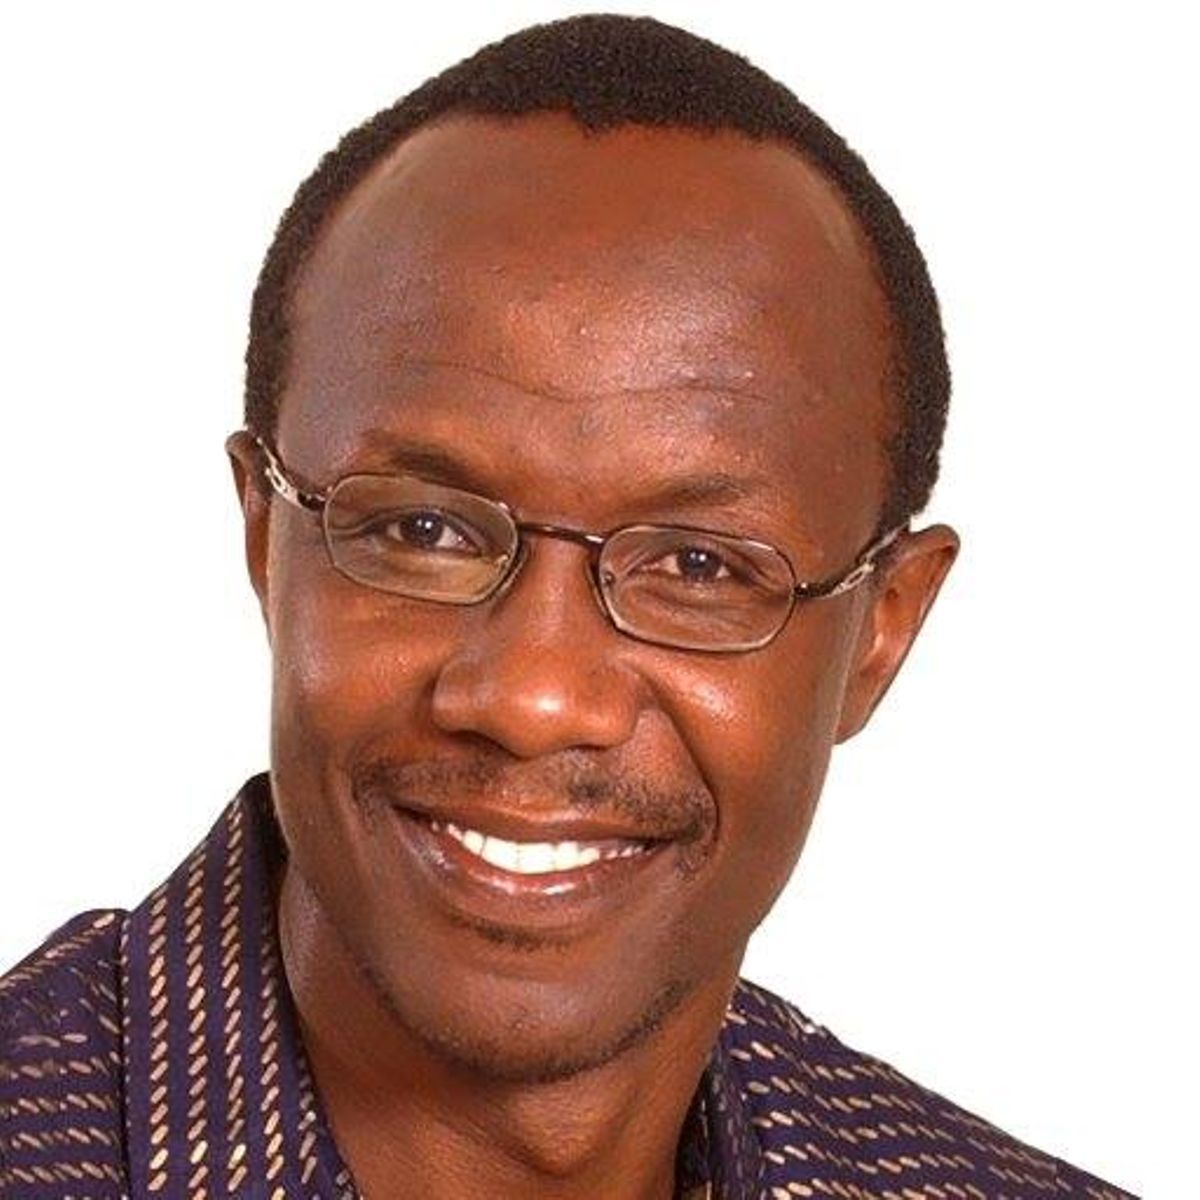 David Ndii Might Be Working For Cambridge Analytica – Blogger Suggests